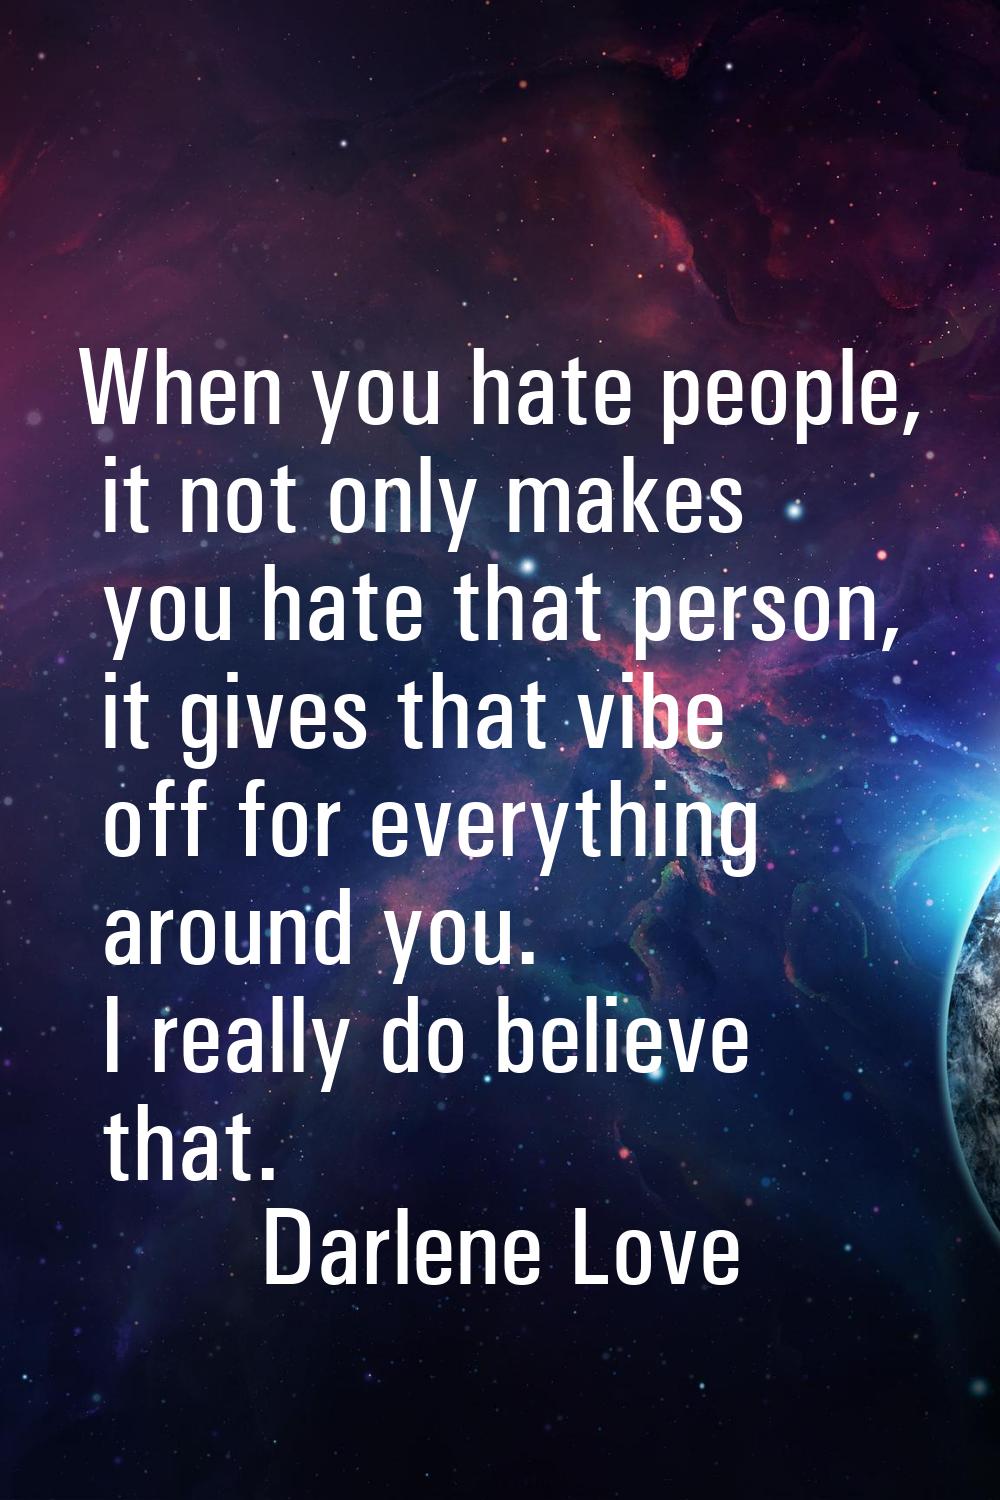 When you hate people, it not only makes you hate that person, it gives that vibe off for everything